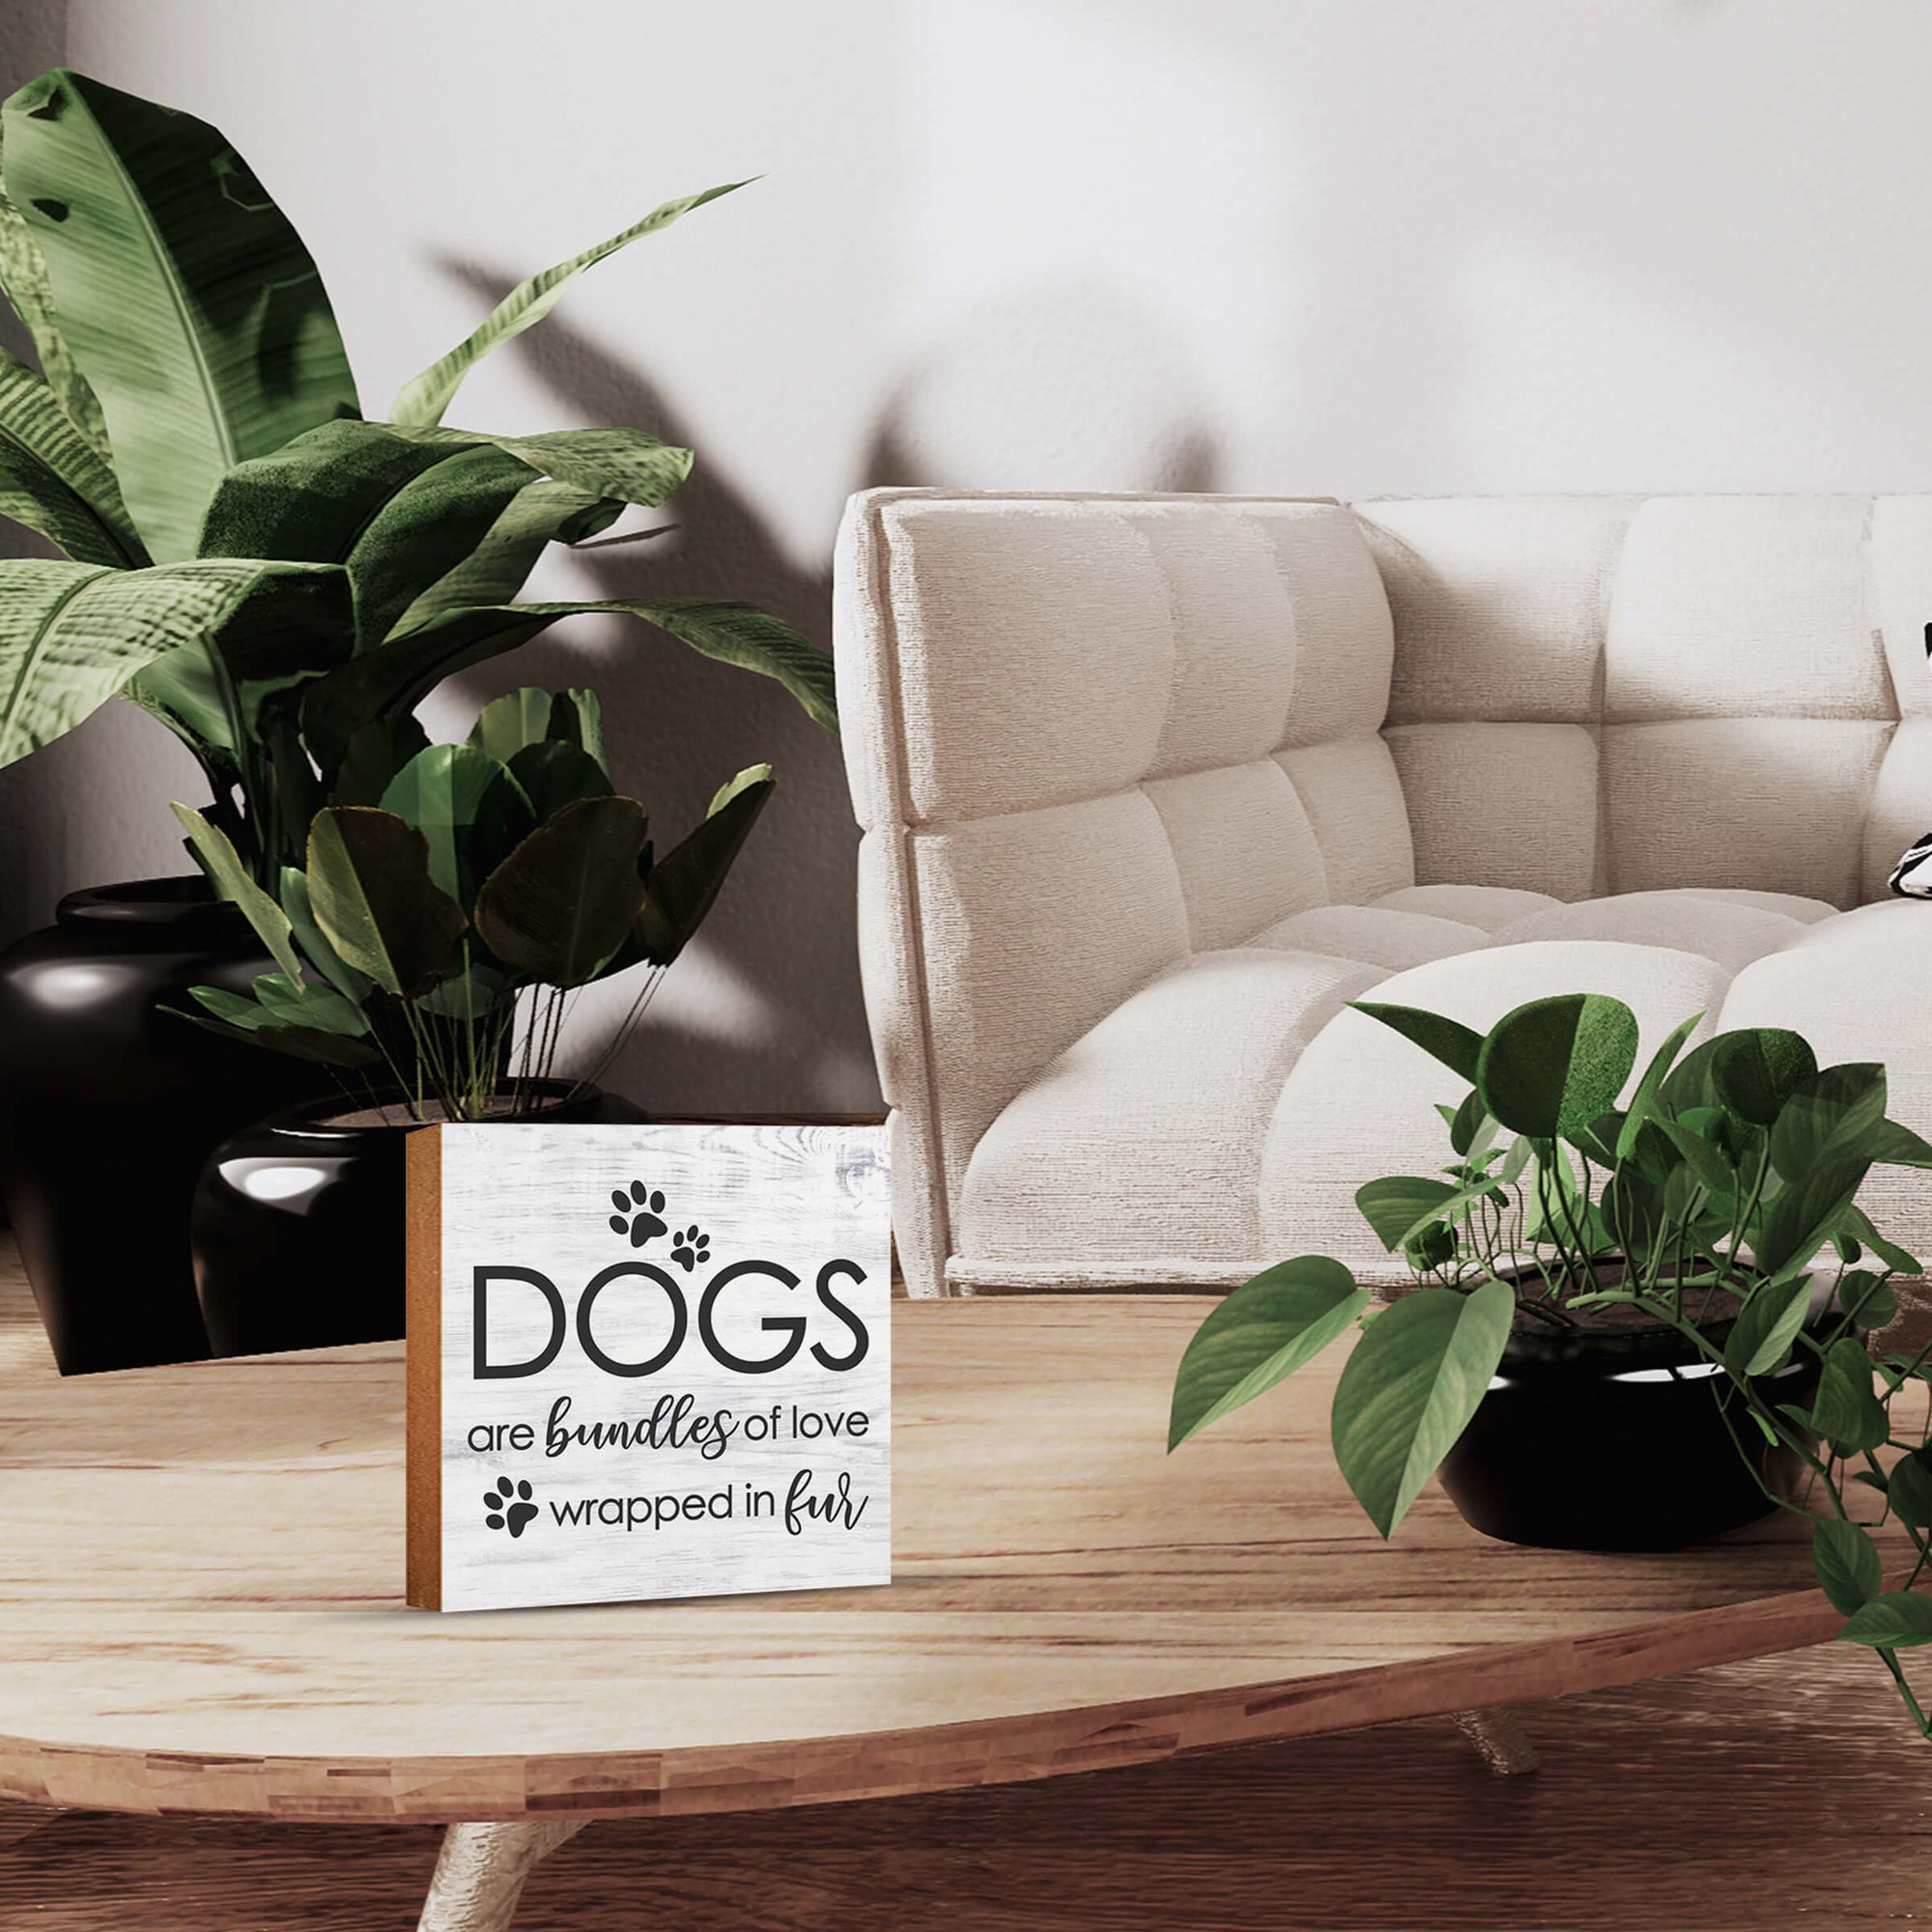 Wooden Shelf Decor and Tabletop Signs with Pet Verses - Bundles of Love